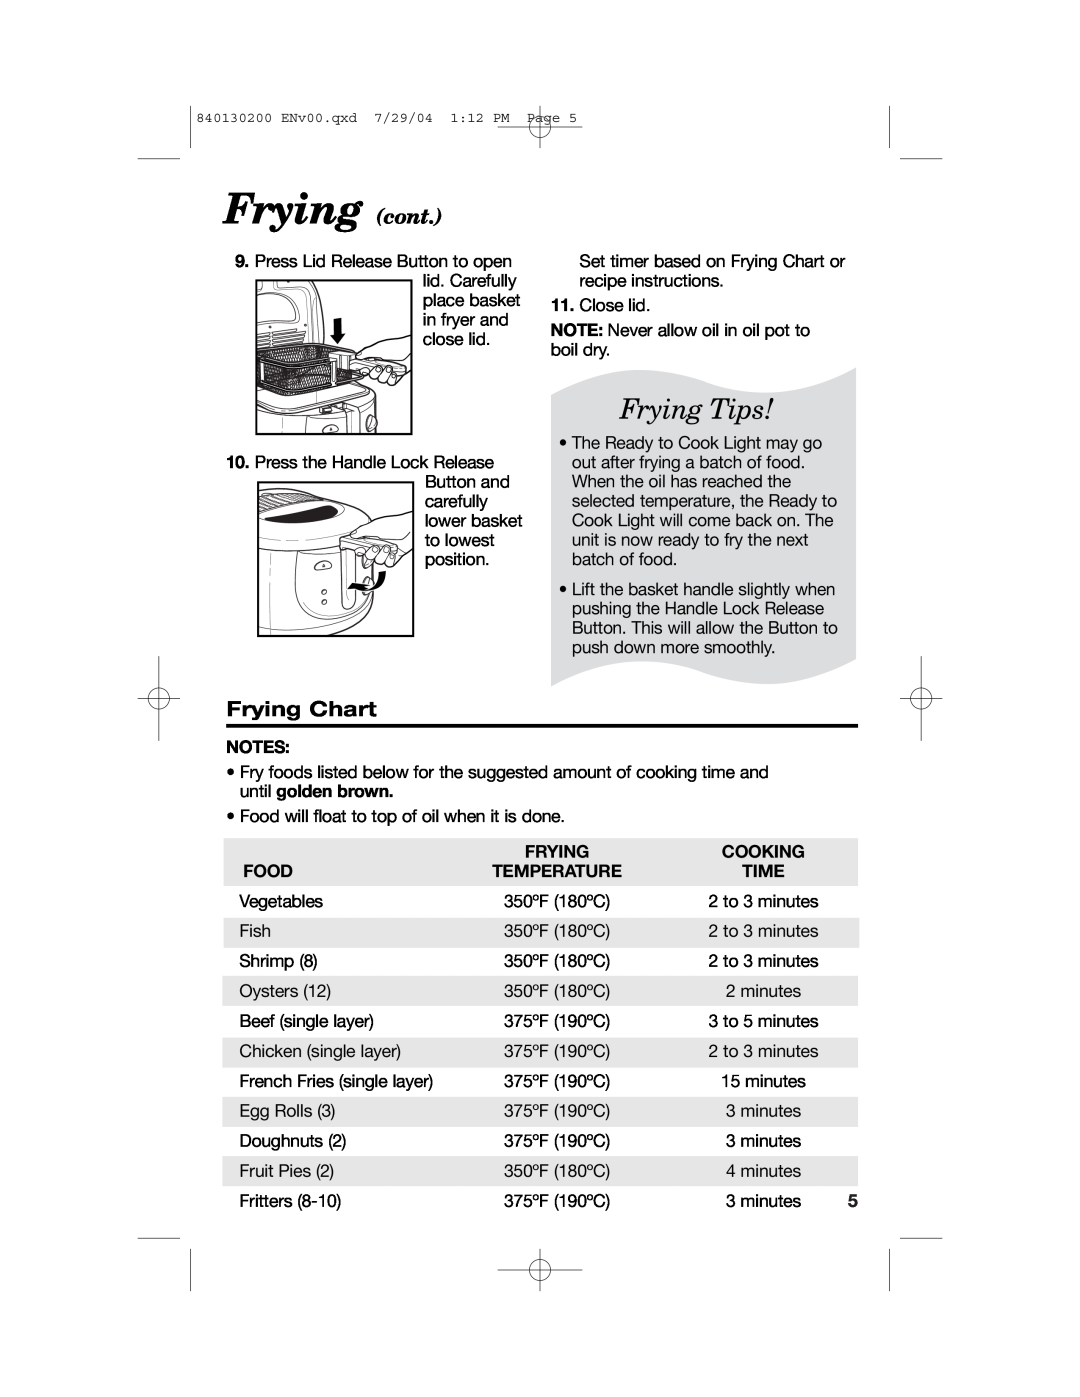 Hamilton Beach 35020C manual Frying cont, Frying Tips, Frying Chart, Cooking, Food, Temperature, Time 